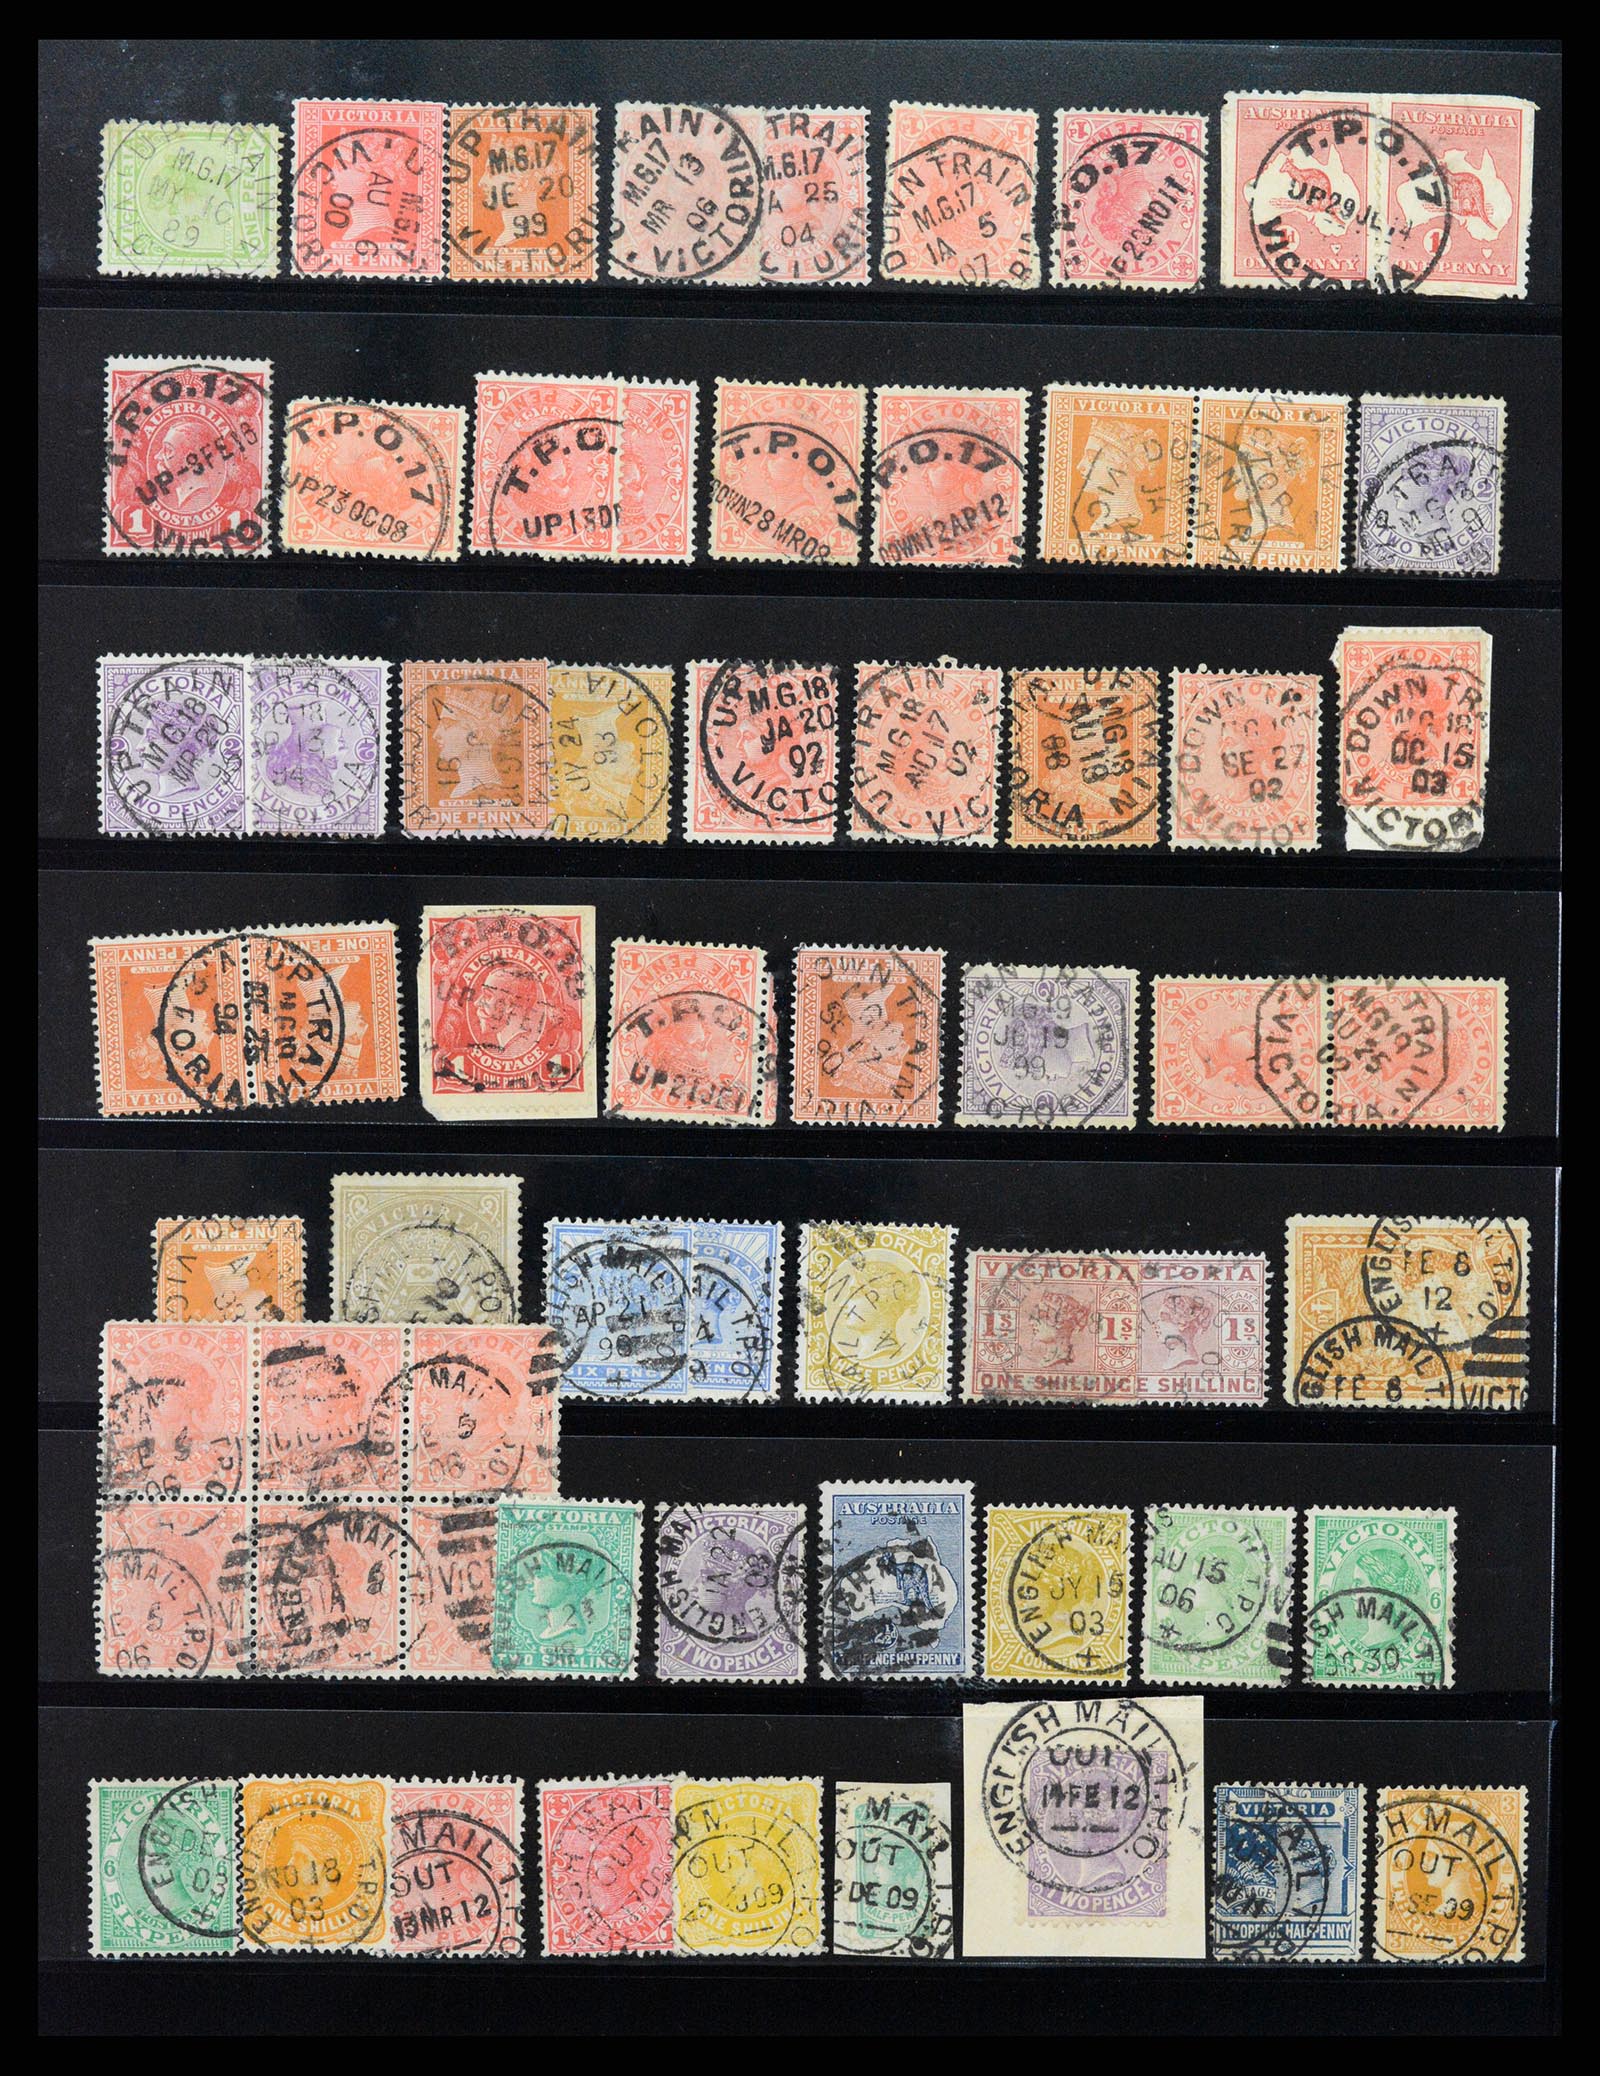 37514 032 - Stamp collection 37514 Victoria tpo cancellations 1865-1930.